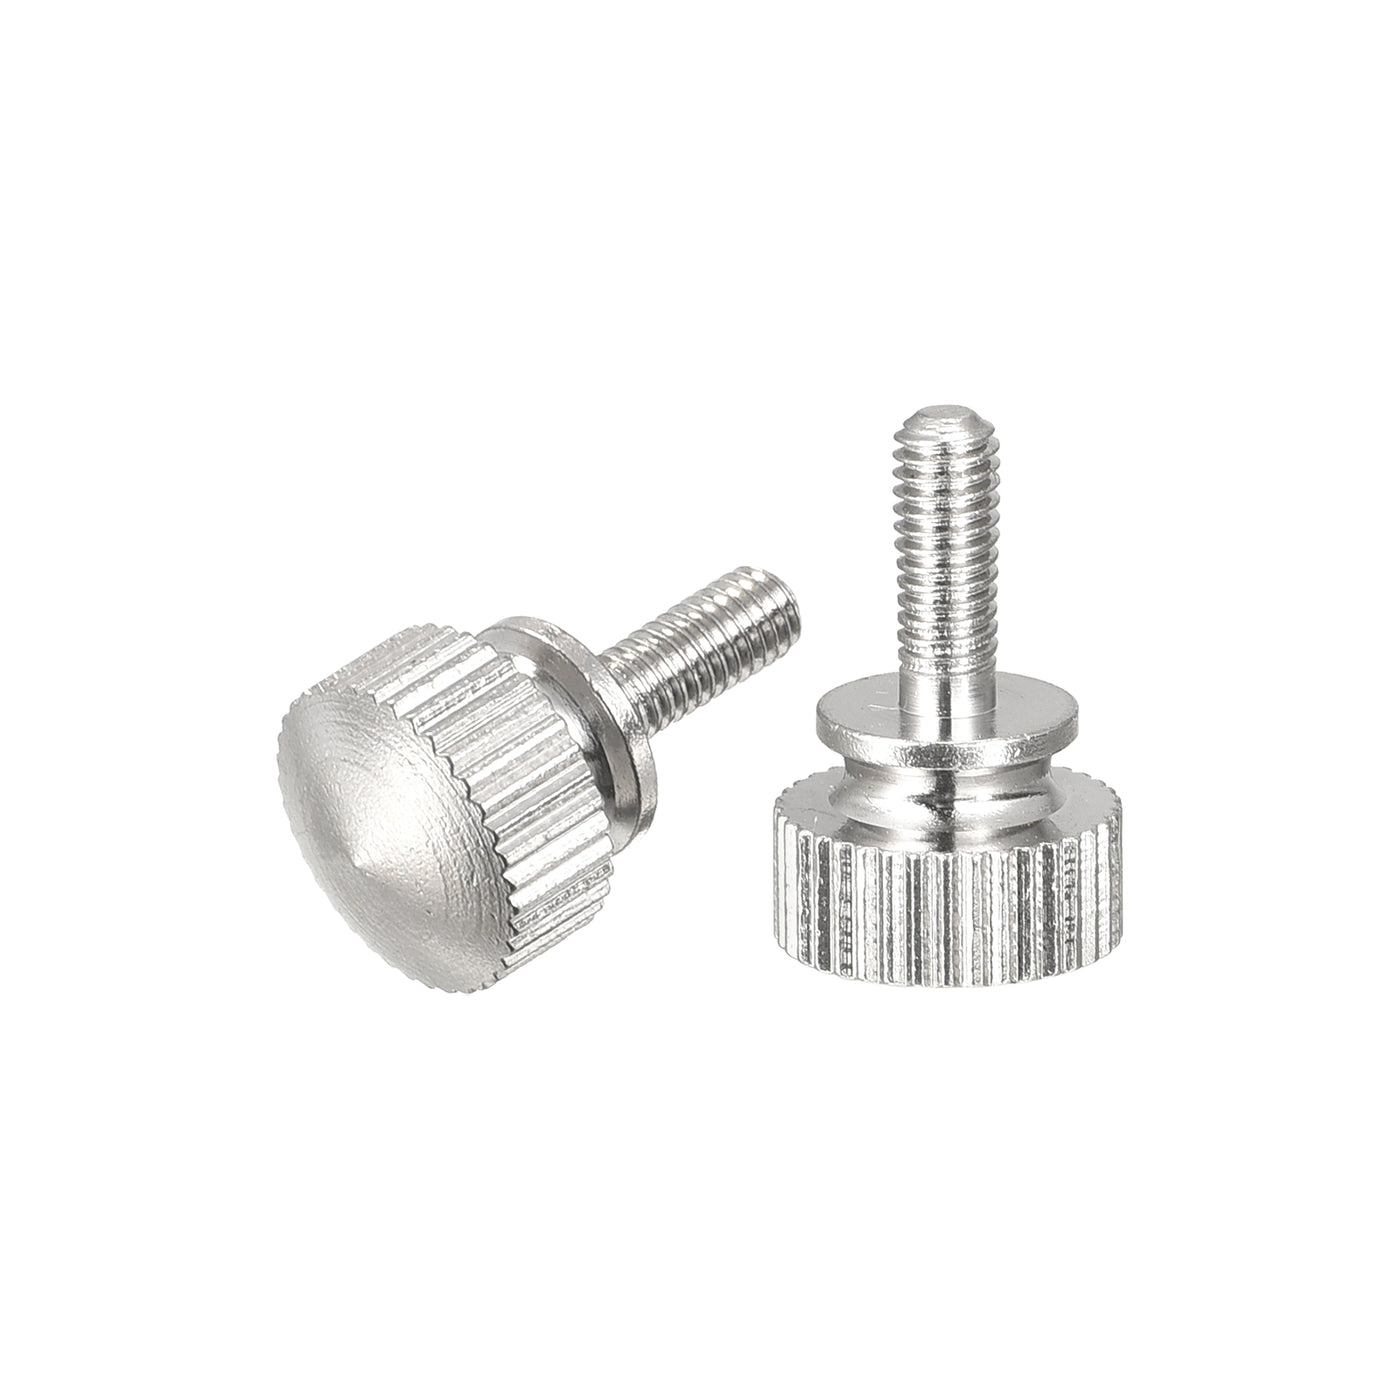 uxcell Uxcell Knurled Thumb Screws, M3x8mm Brass Shoulder Bolts Grip Knobs Fasteners, Nickel Plated 2Pcs